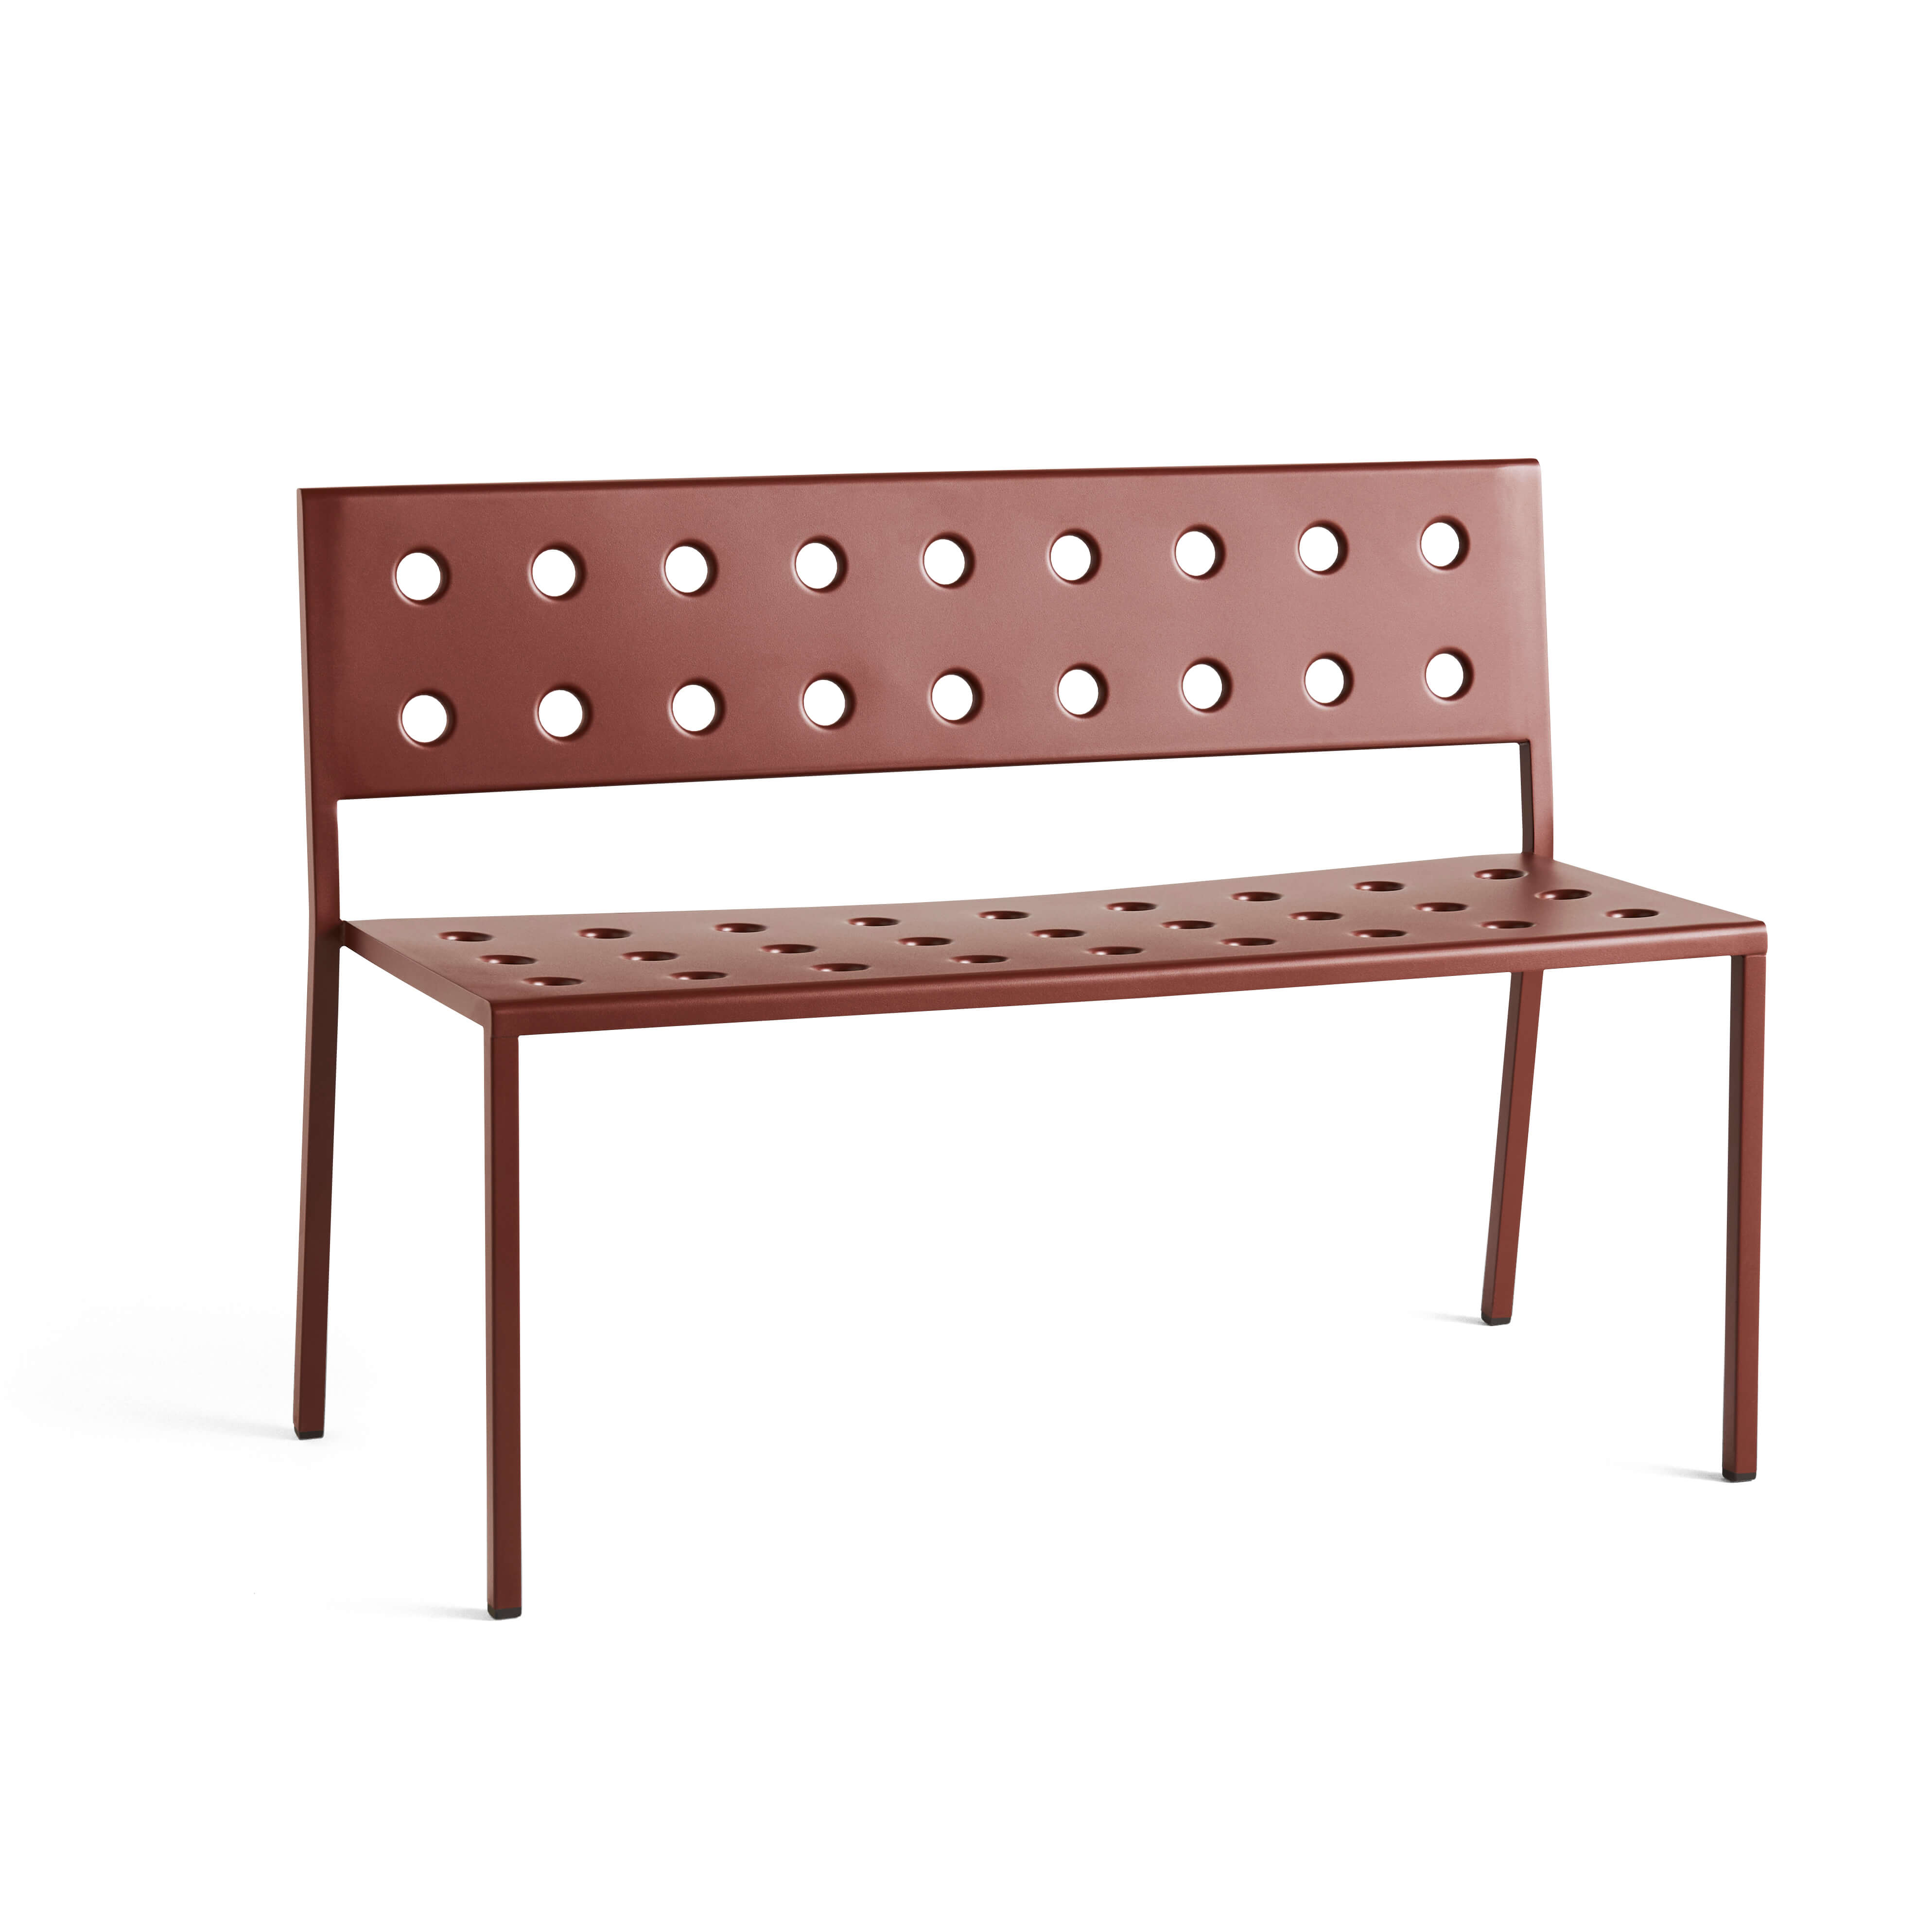 Balcony dining bench - Iron red